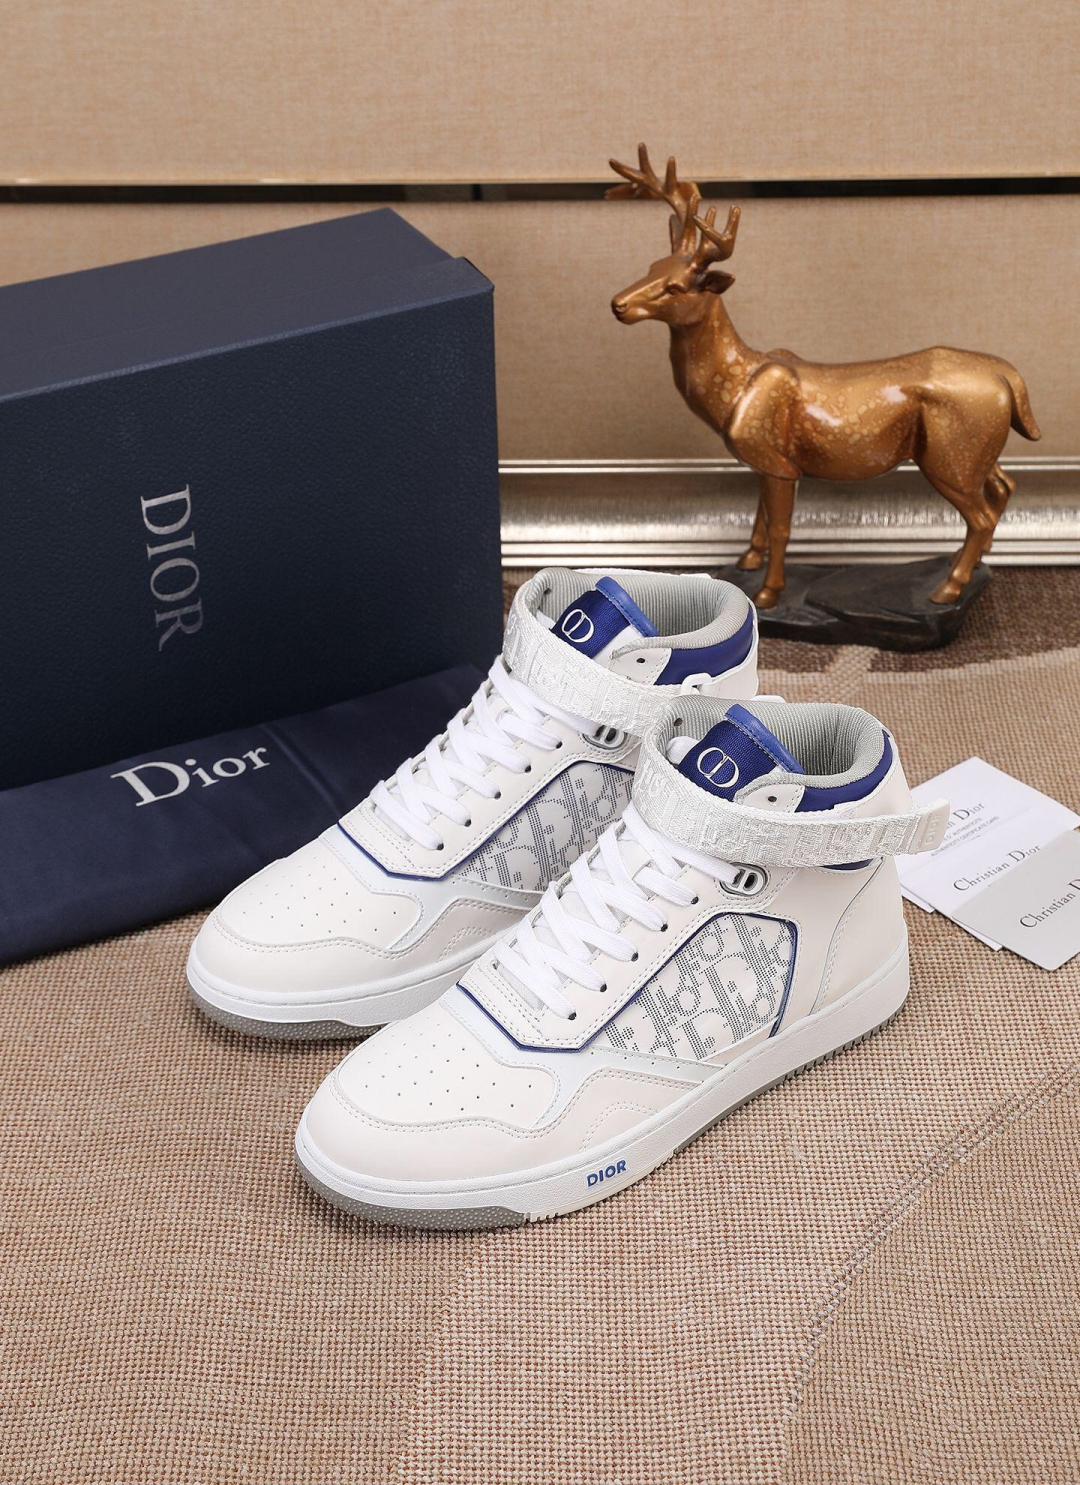 Giày Sneakers Cổ Cao Dior Pp280